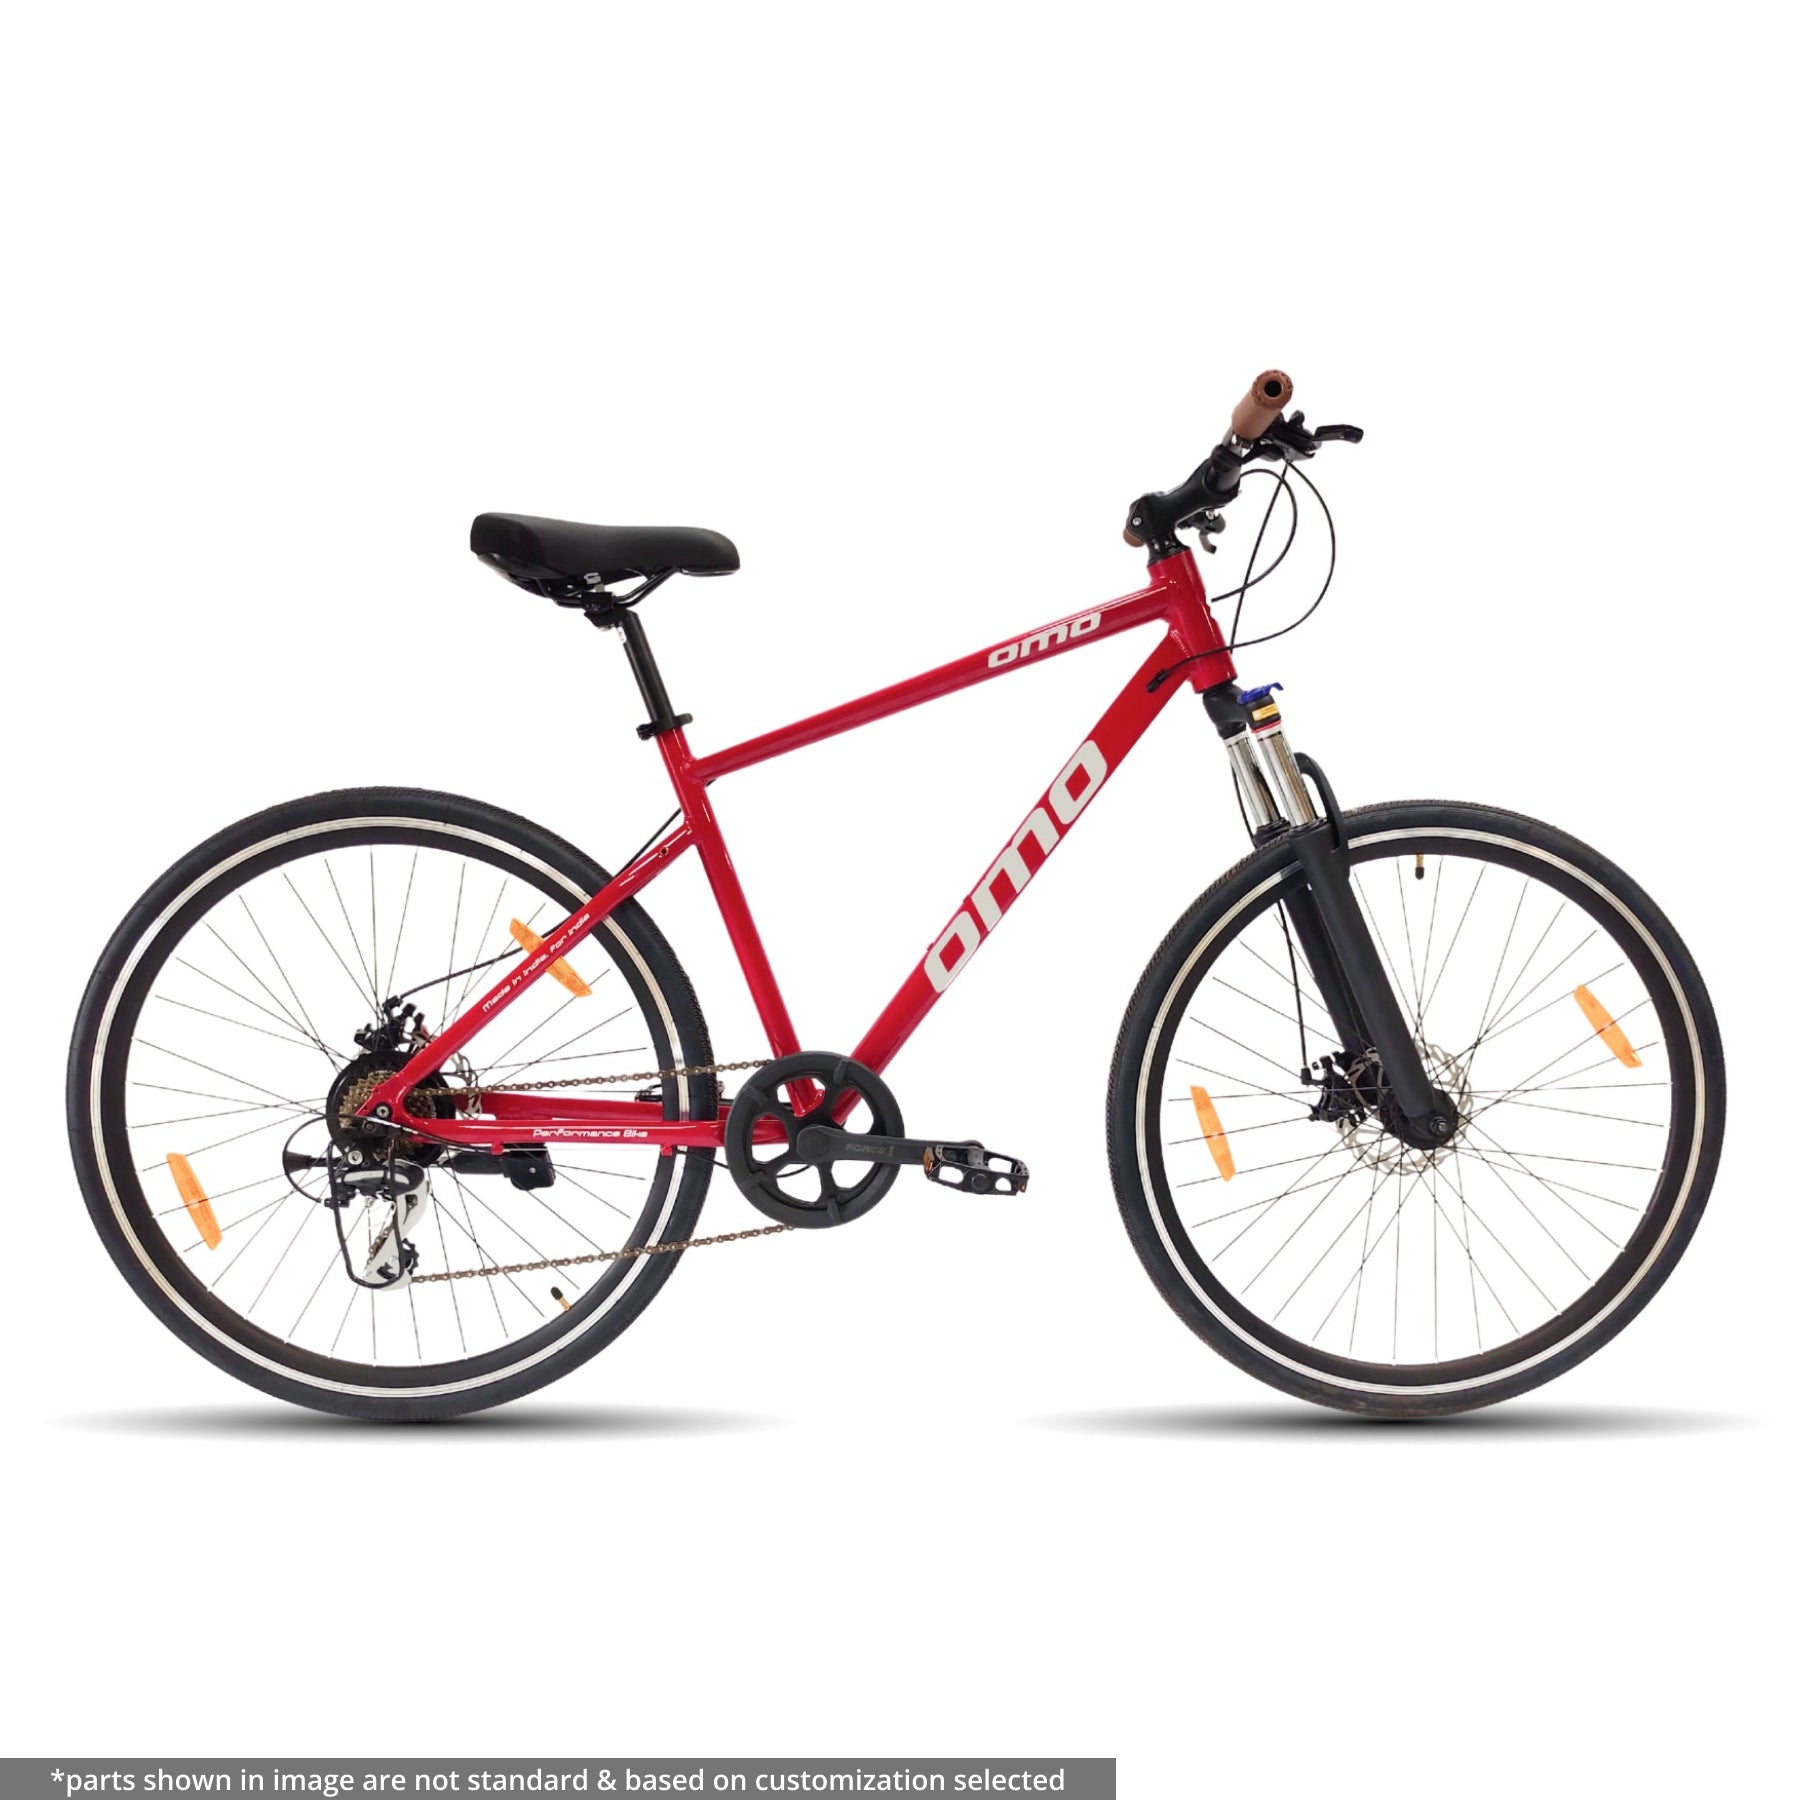 ladakh x geared hybrid bike alloy frame 700c with shimano gears and lockout preload suspension red color